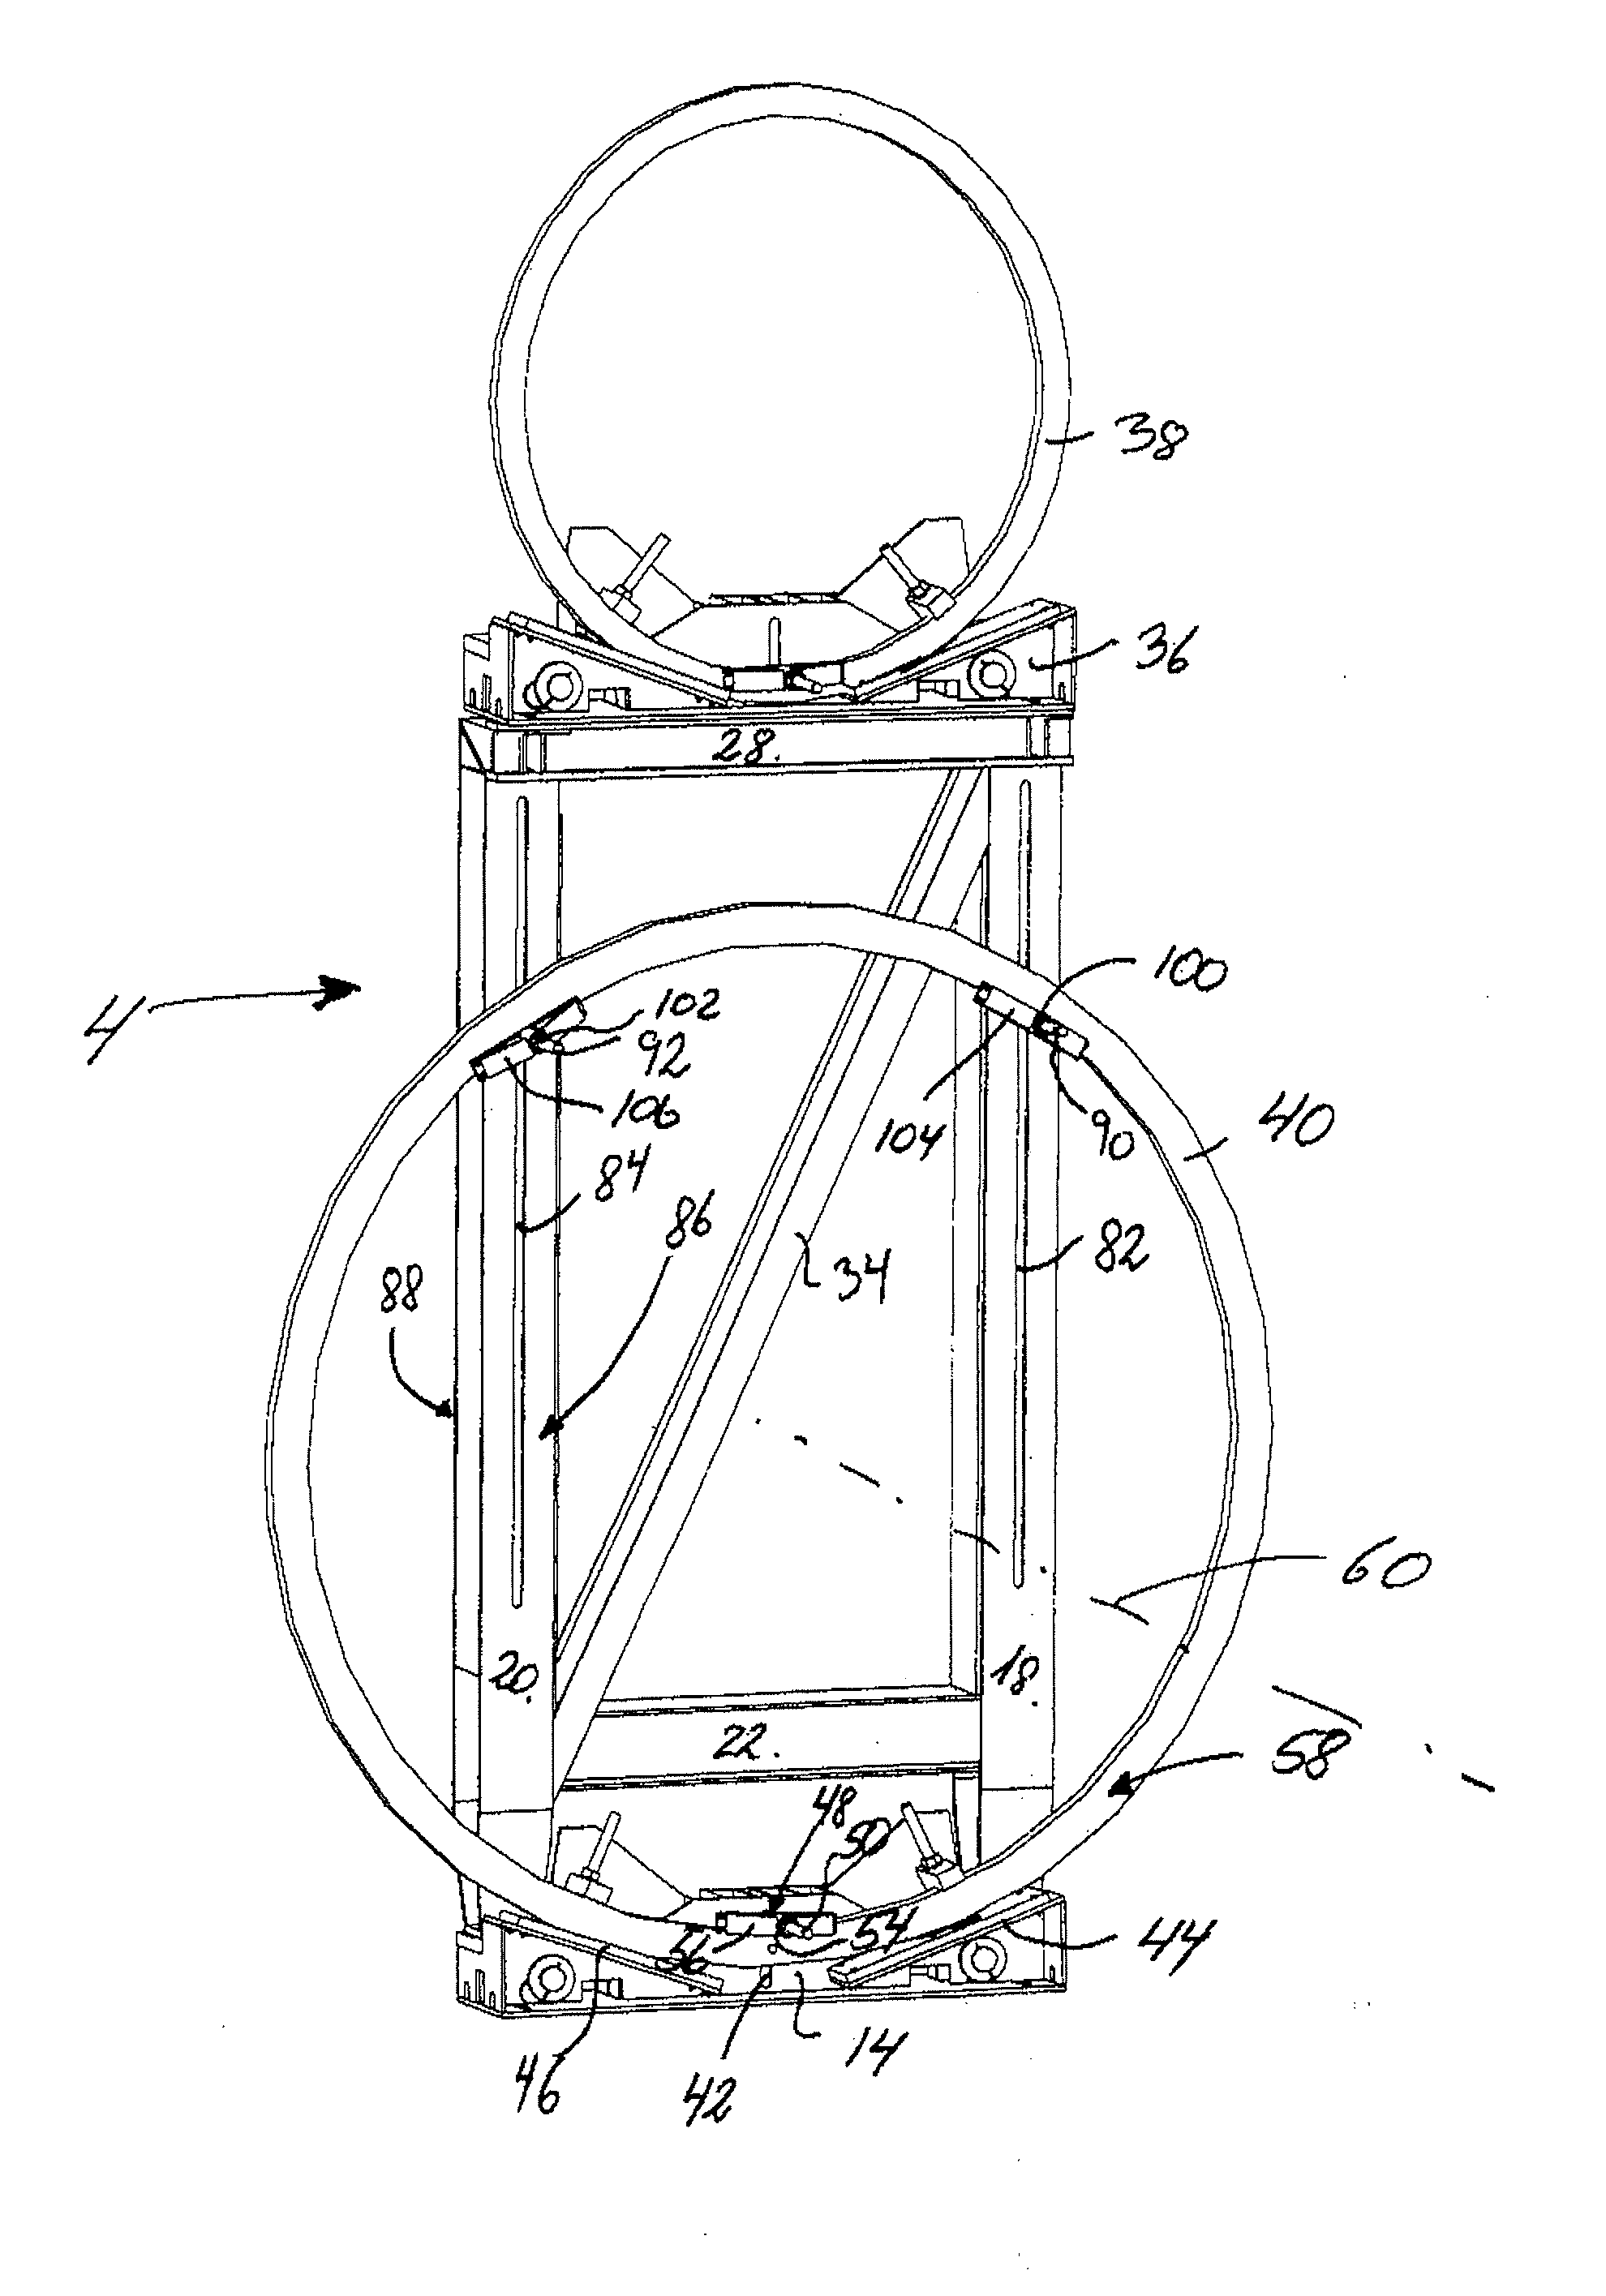 Fixture for retaining an end of a member